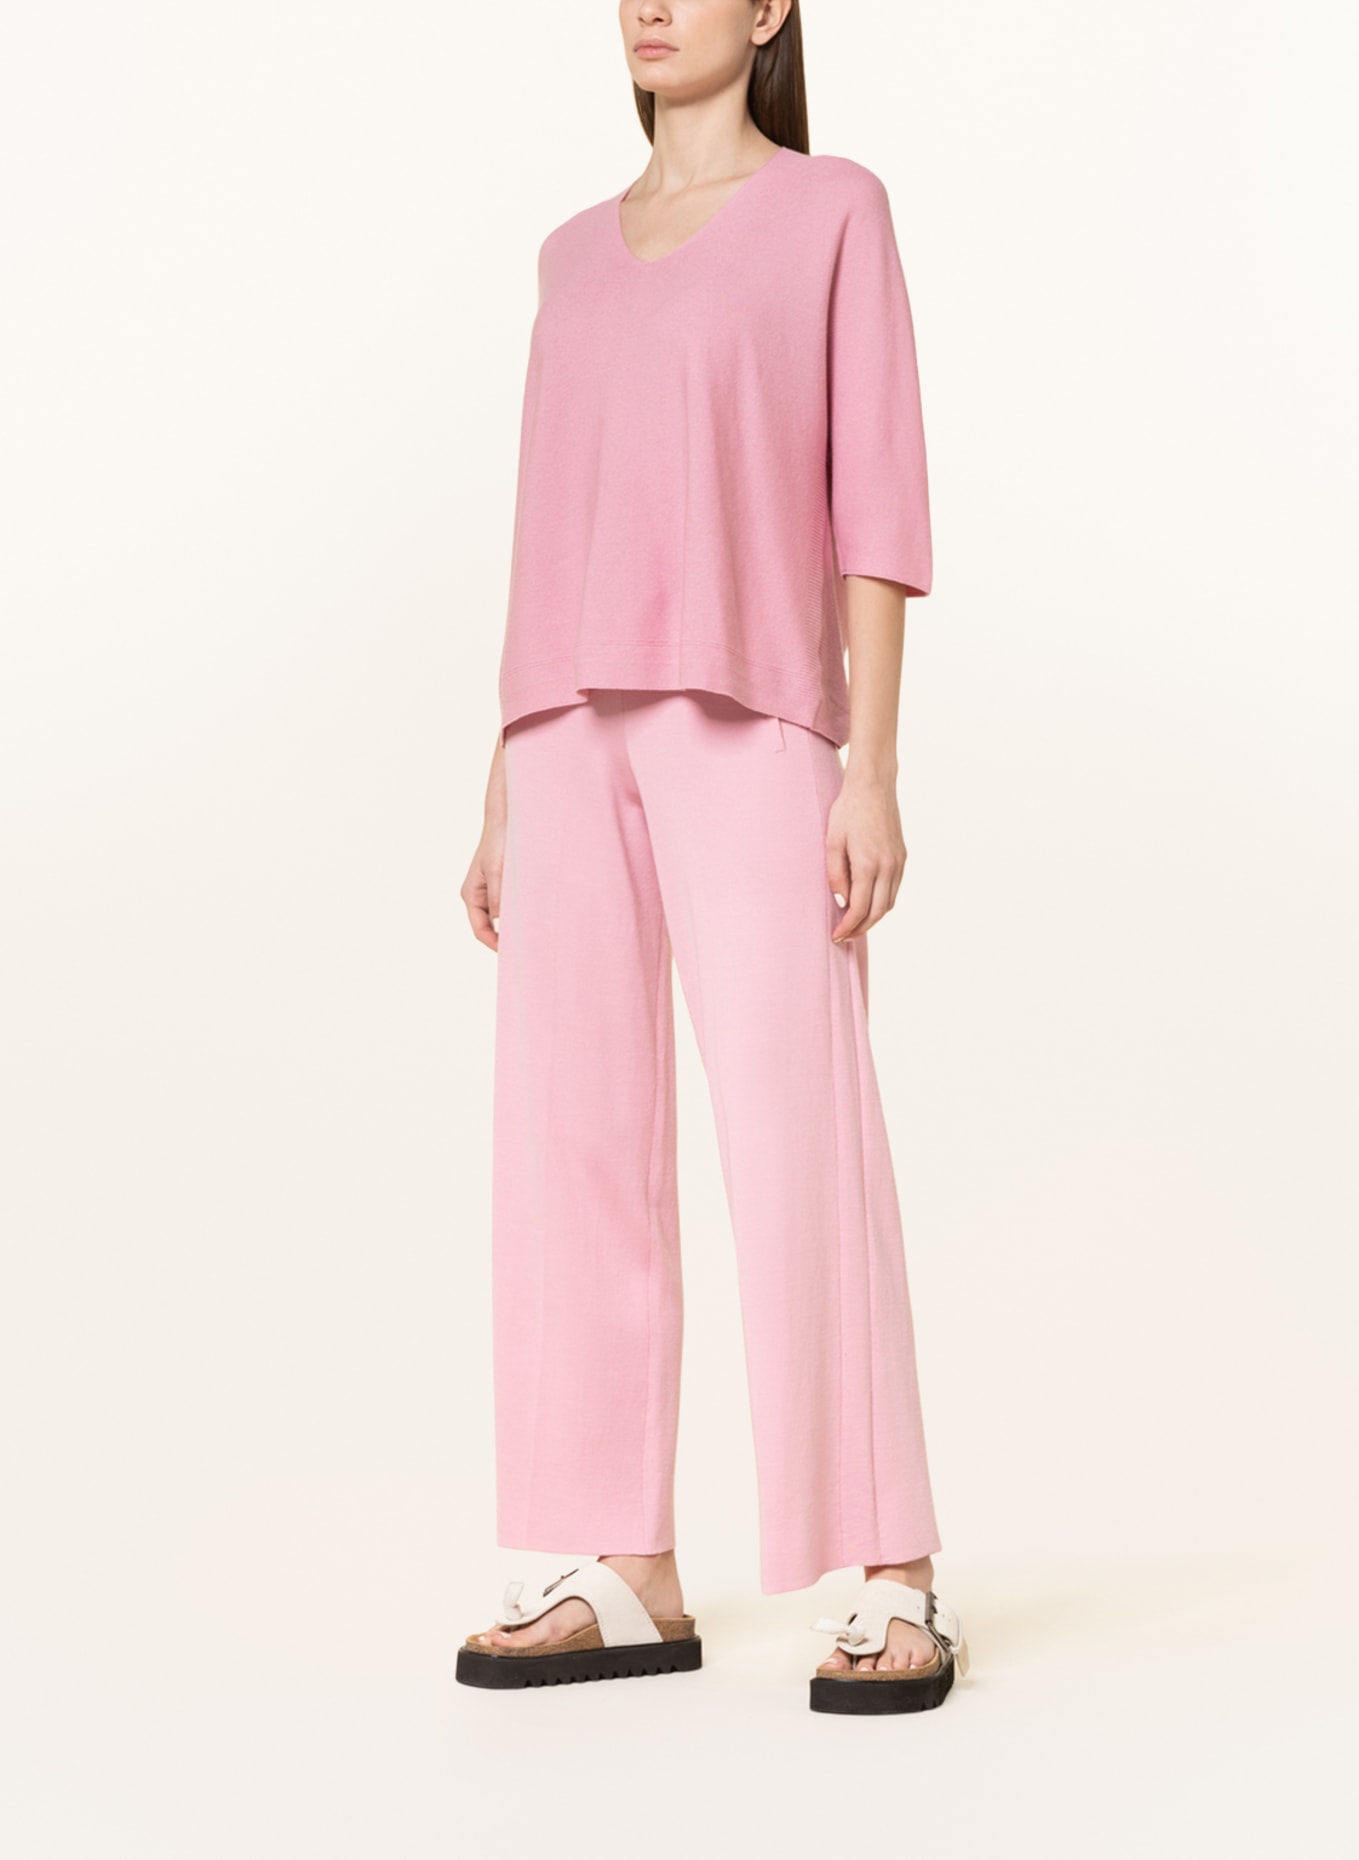 HEMISPHERE Pants in jogger style, Color: PINK (Image 2)